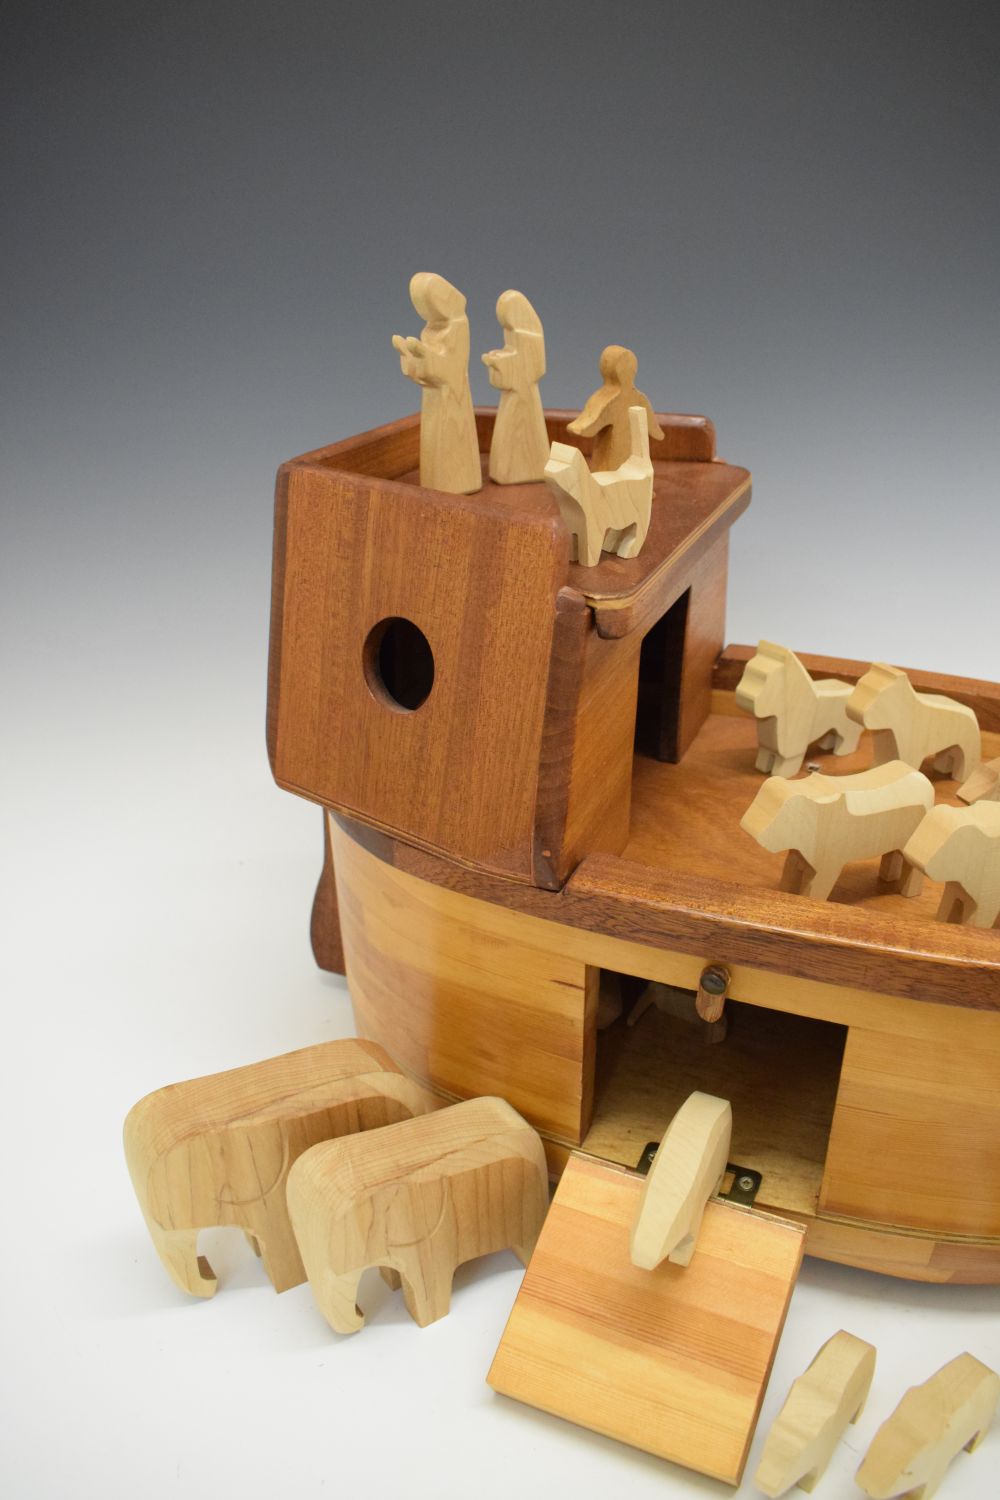 Scratch built pine and mahogany pull-along Noah's Ark with animals, 50cm long - Image 5 of 5